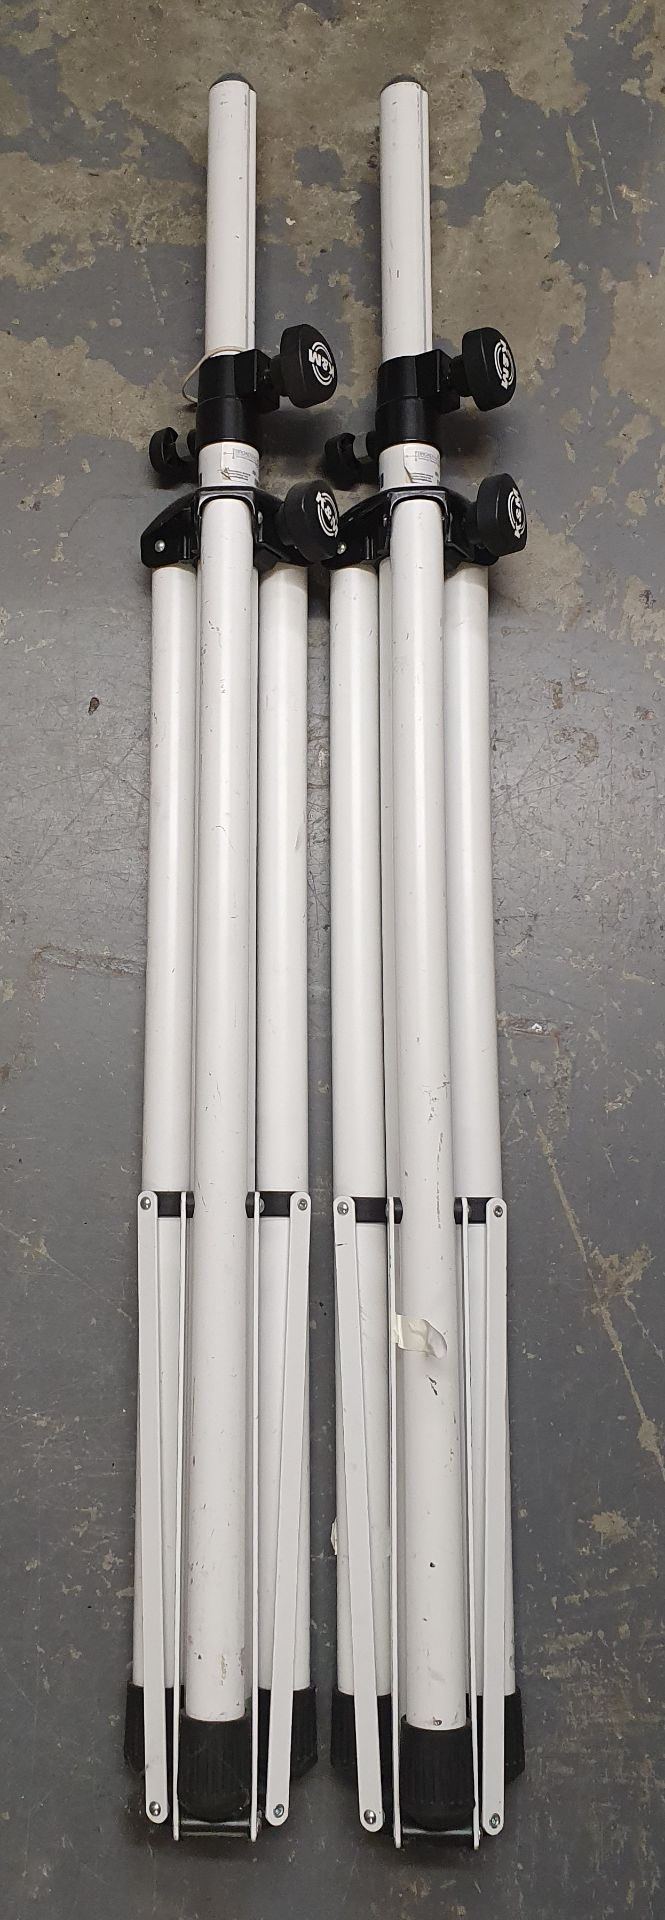 A pair of K+M White Tripod Speaker Stands, no bag